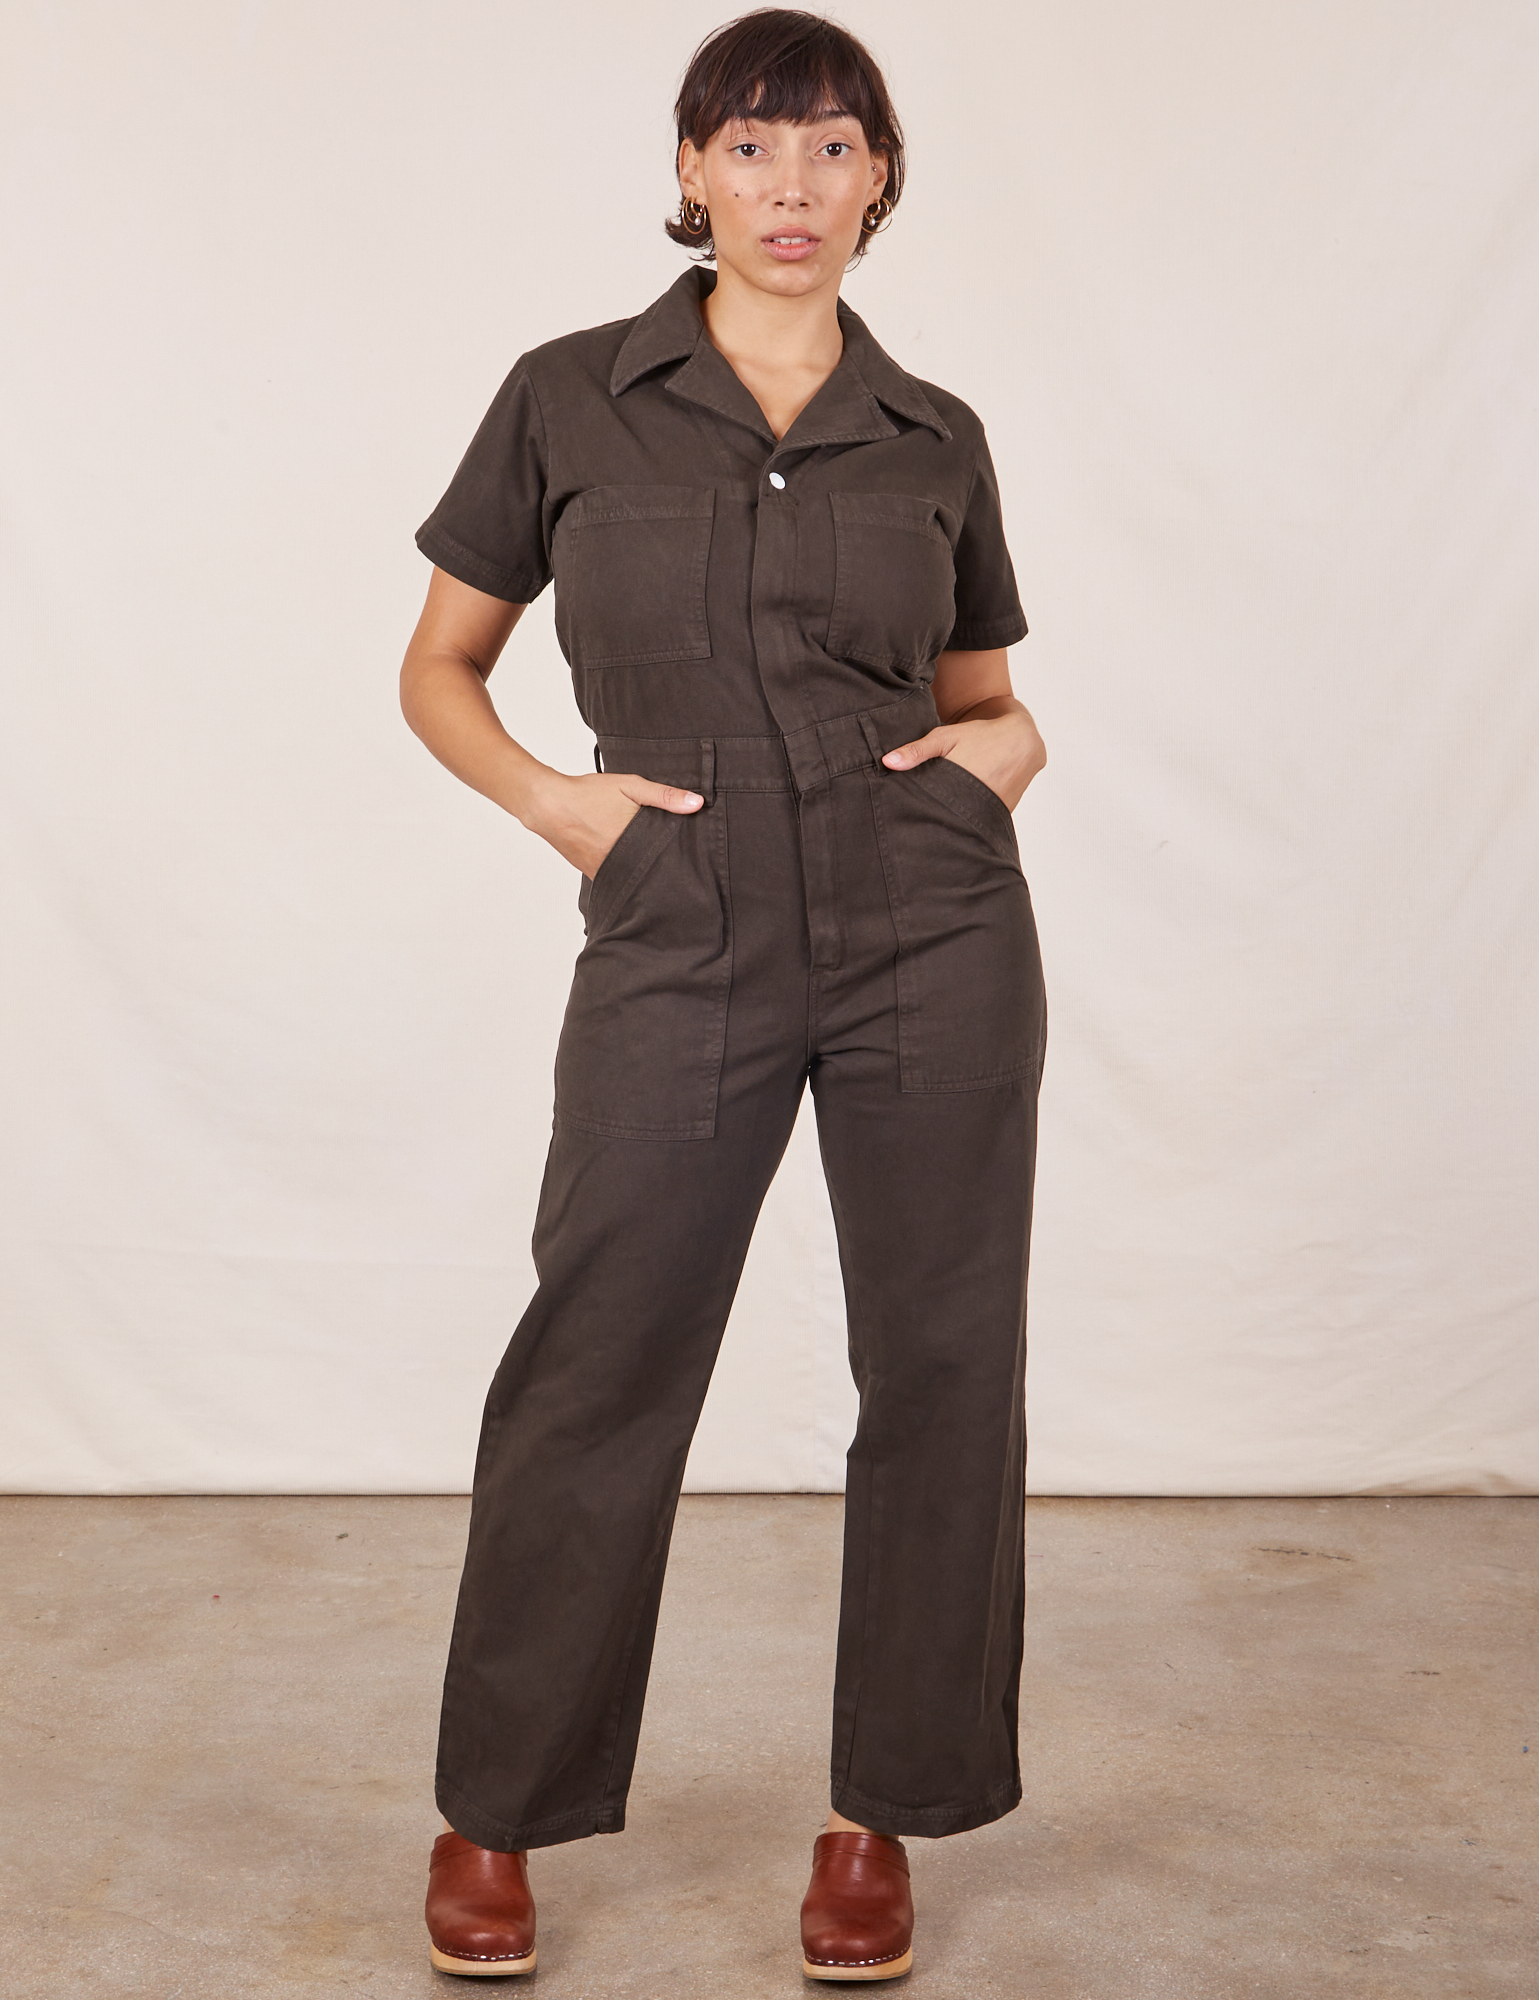 Tiara is 5&#39;4&quot; and wearing S Short Sleeve Jumpsuit in Espresso Brown 